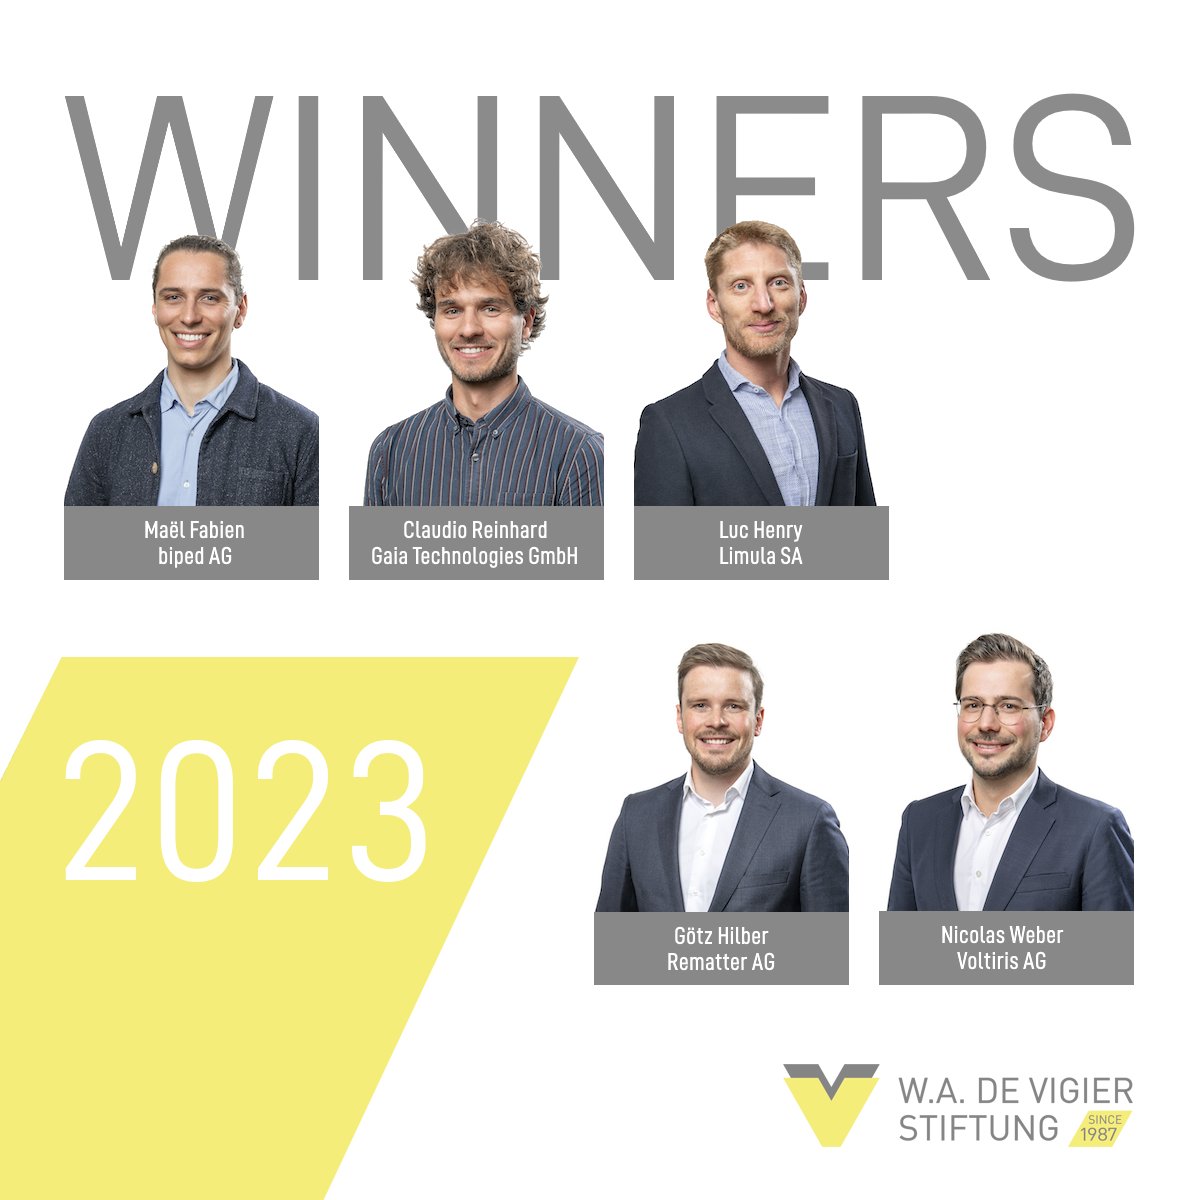 🏆🏆🏆🏆🏆 CONGRATULATIONS! The 5 winners of the 2023 W.A. #devigier Awards are: #biped, @gaiatechxyz, @LimulaB, #Rematter and #Voltiris! Thanks everyone for an unforgettable award ceremony and CHEERS to supporting #swissstartups ! 🎉